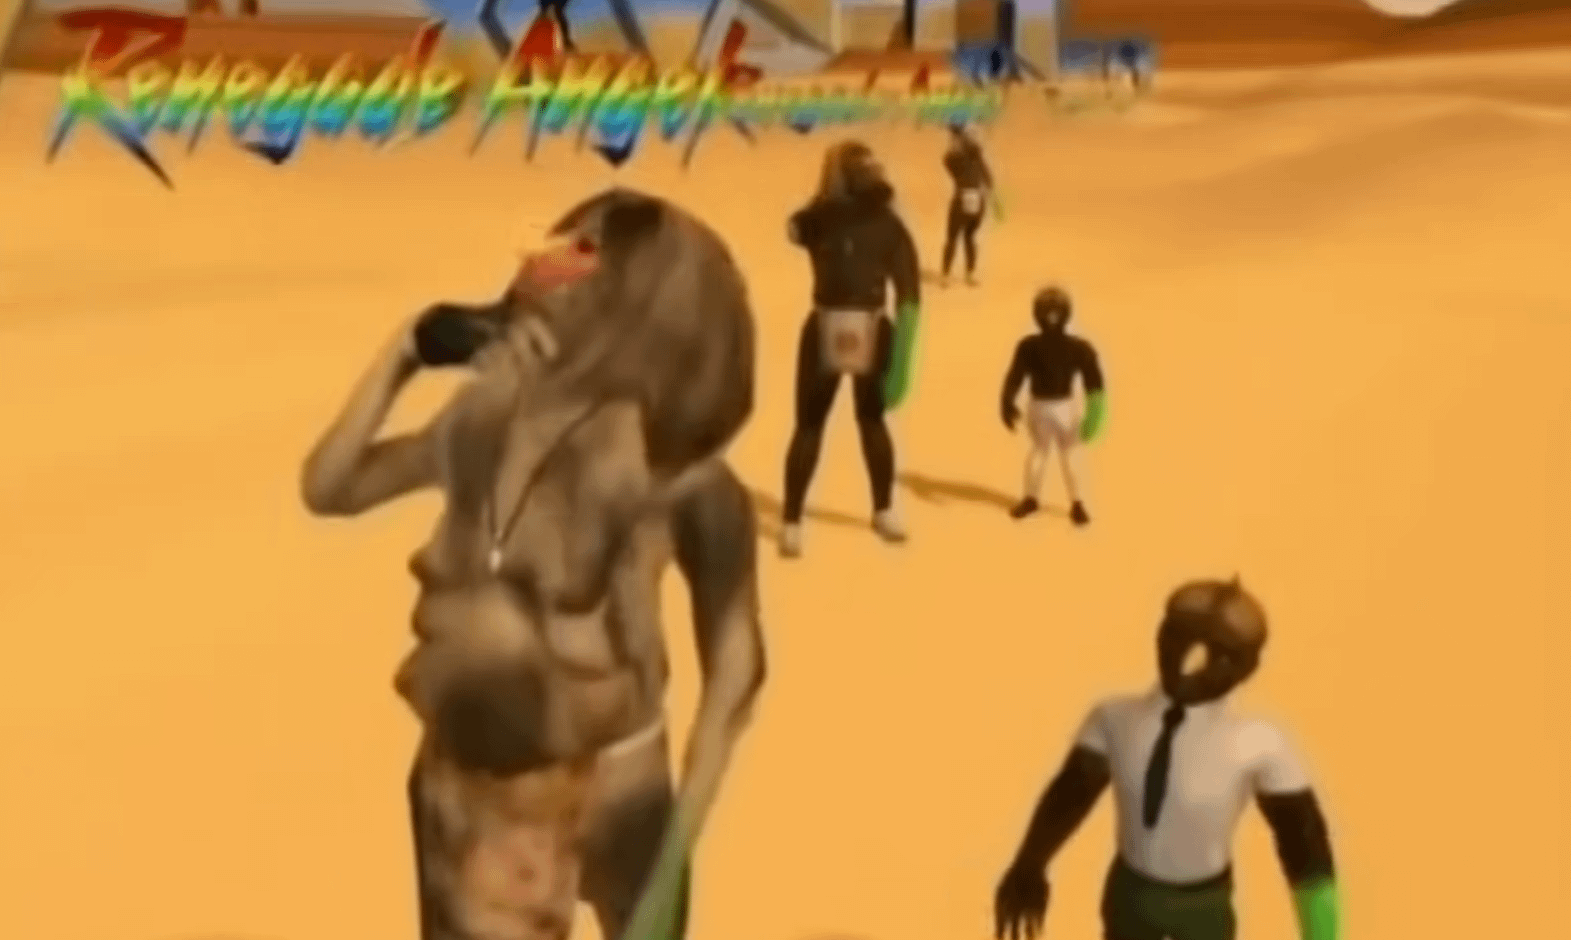 Xavier Renegade Angel Who Are These People Where They What